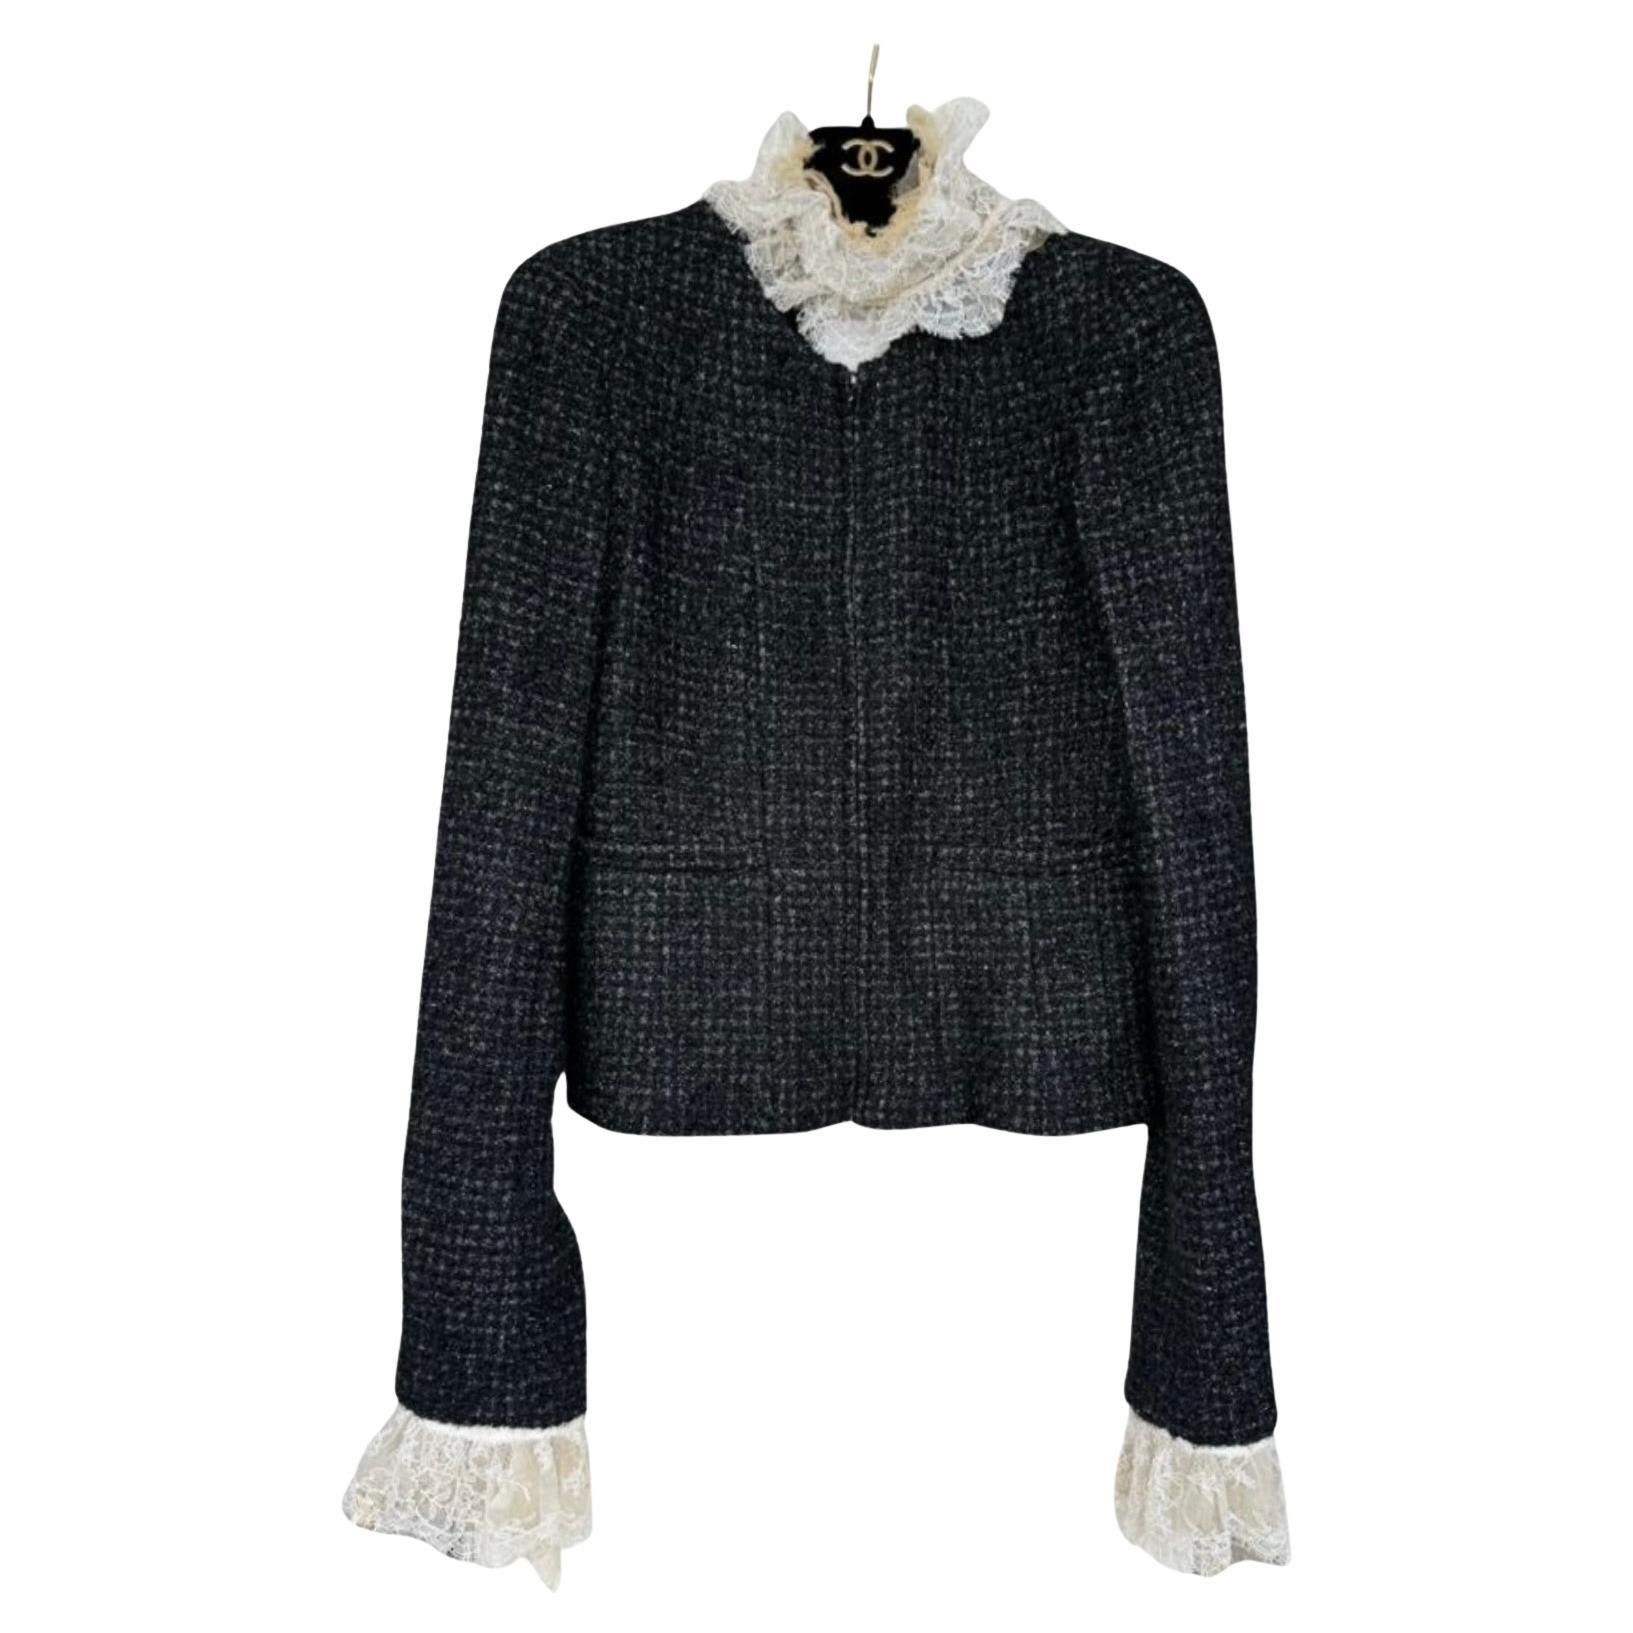 Chanel Ruffle Collar and Cuffs Black Lesage Tweed Jacket For Sale